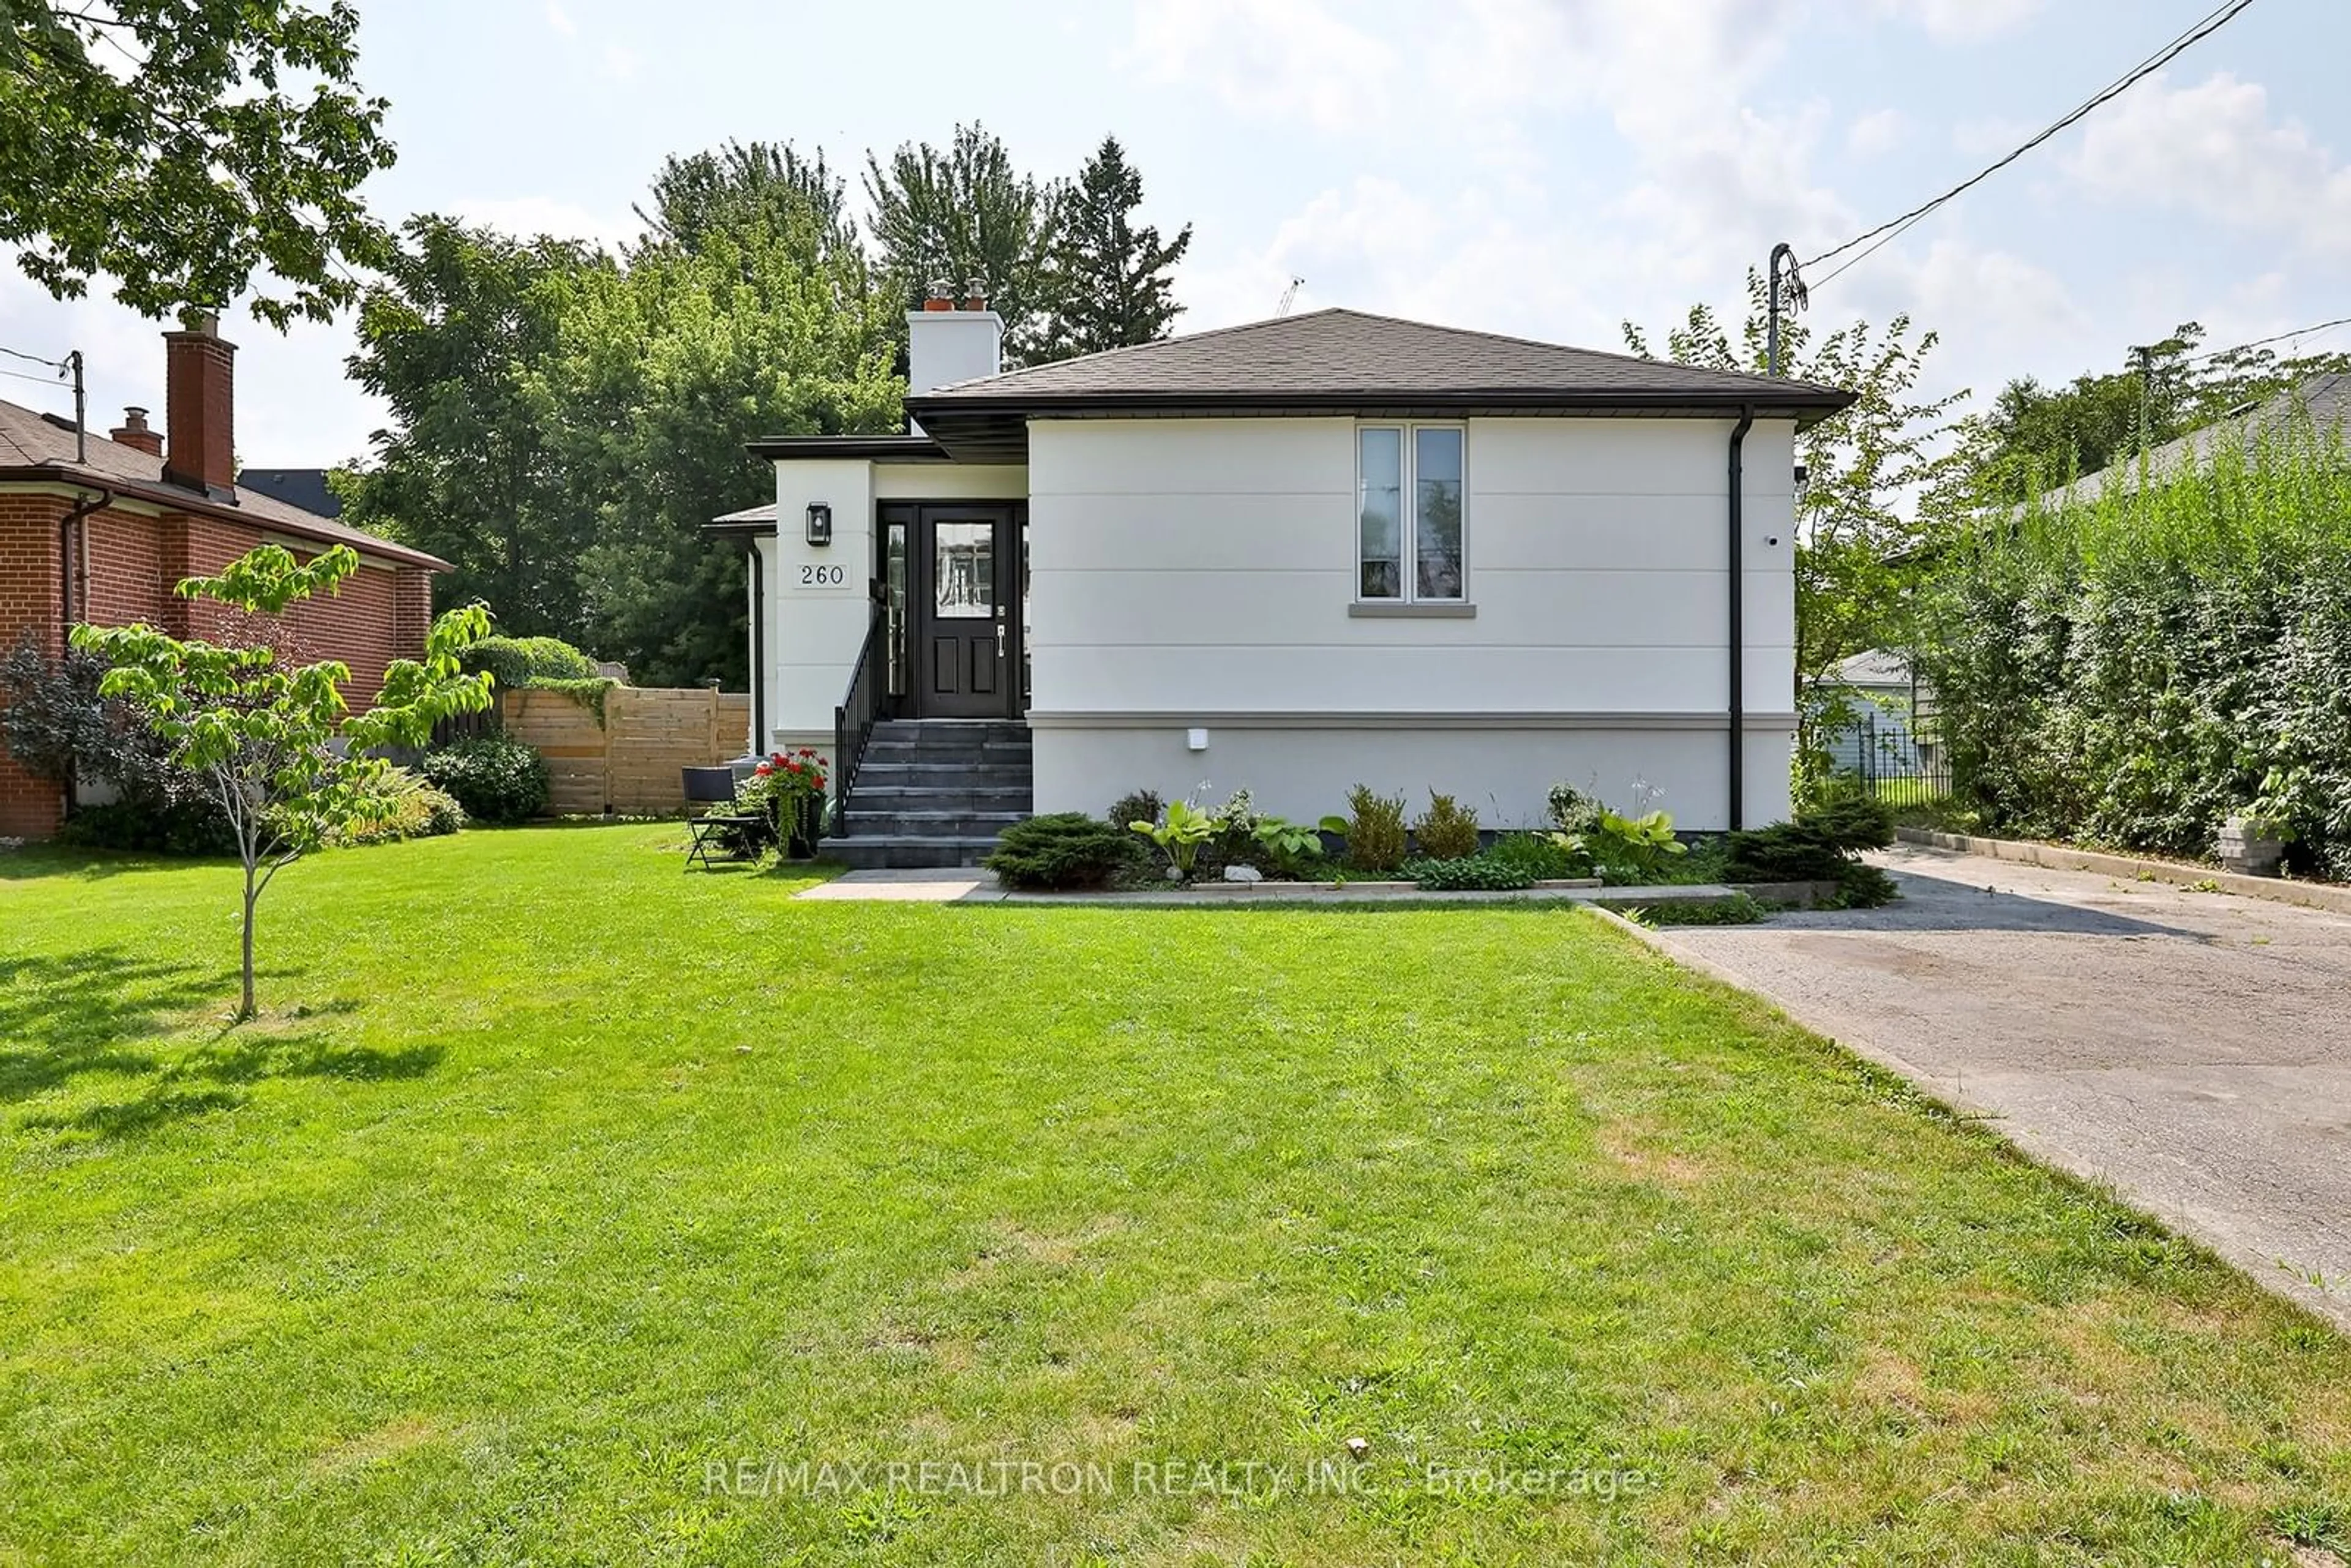 Frontside or backside of a home for 260 Ruggles Ave, Richmond Hill Ontario L4C 1Y7